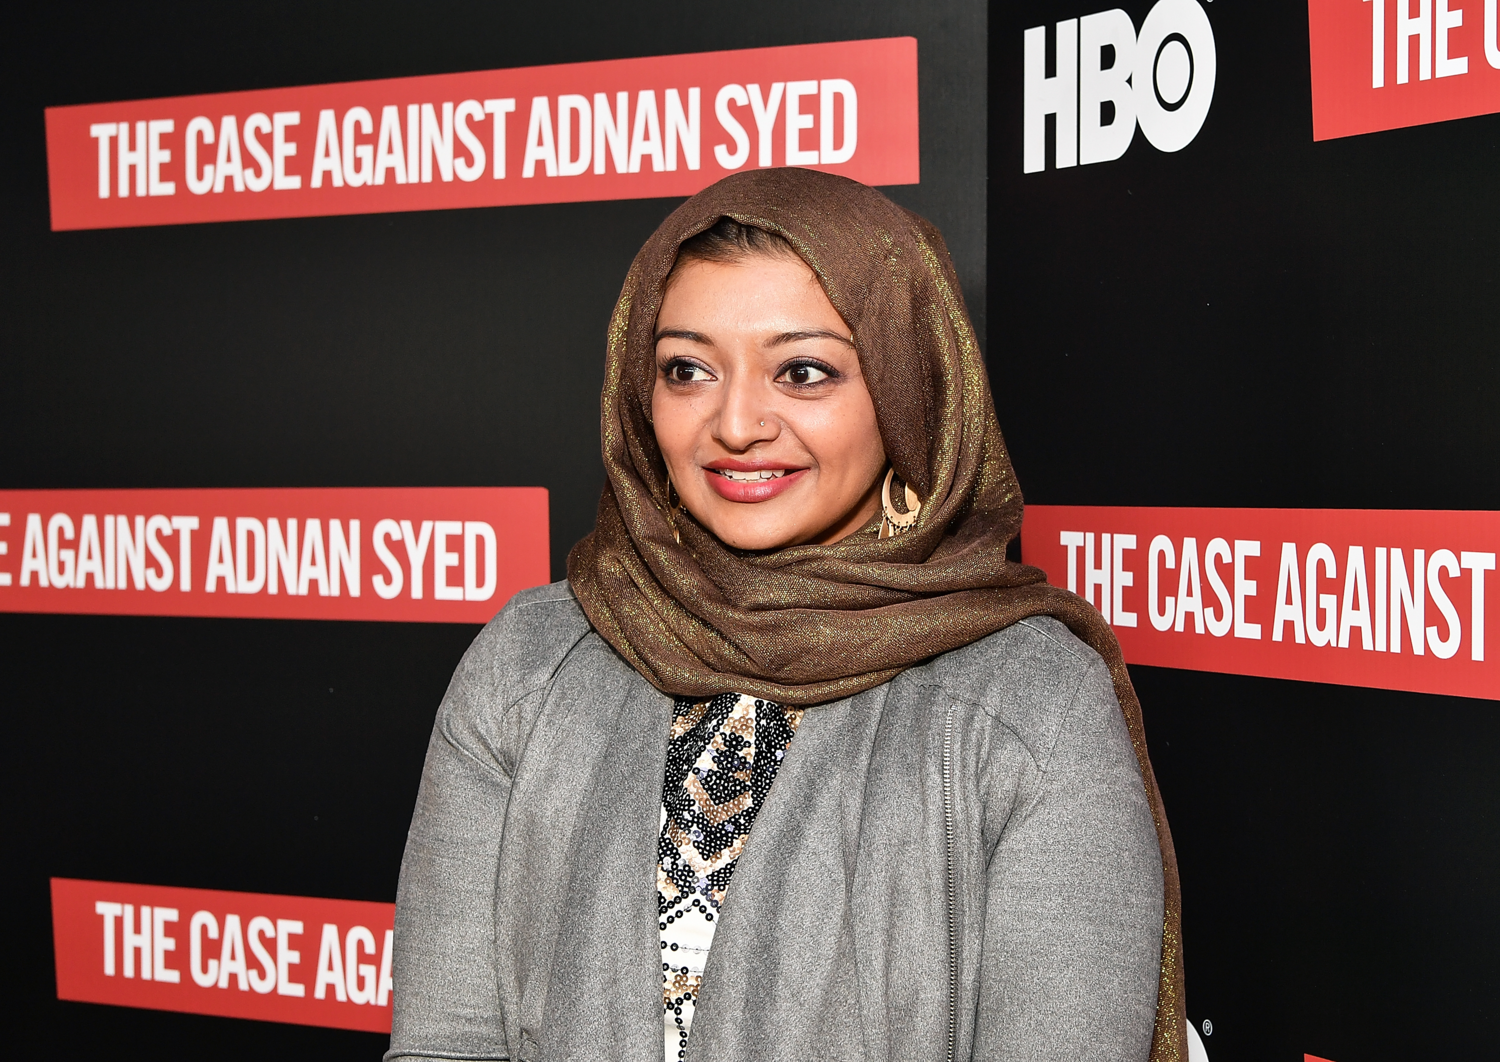 100: Inside “The Case Against Adnan Syed” on HBO